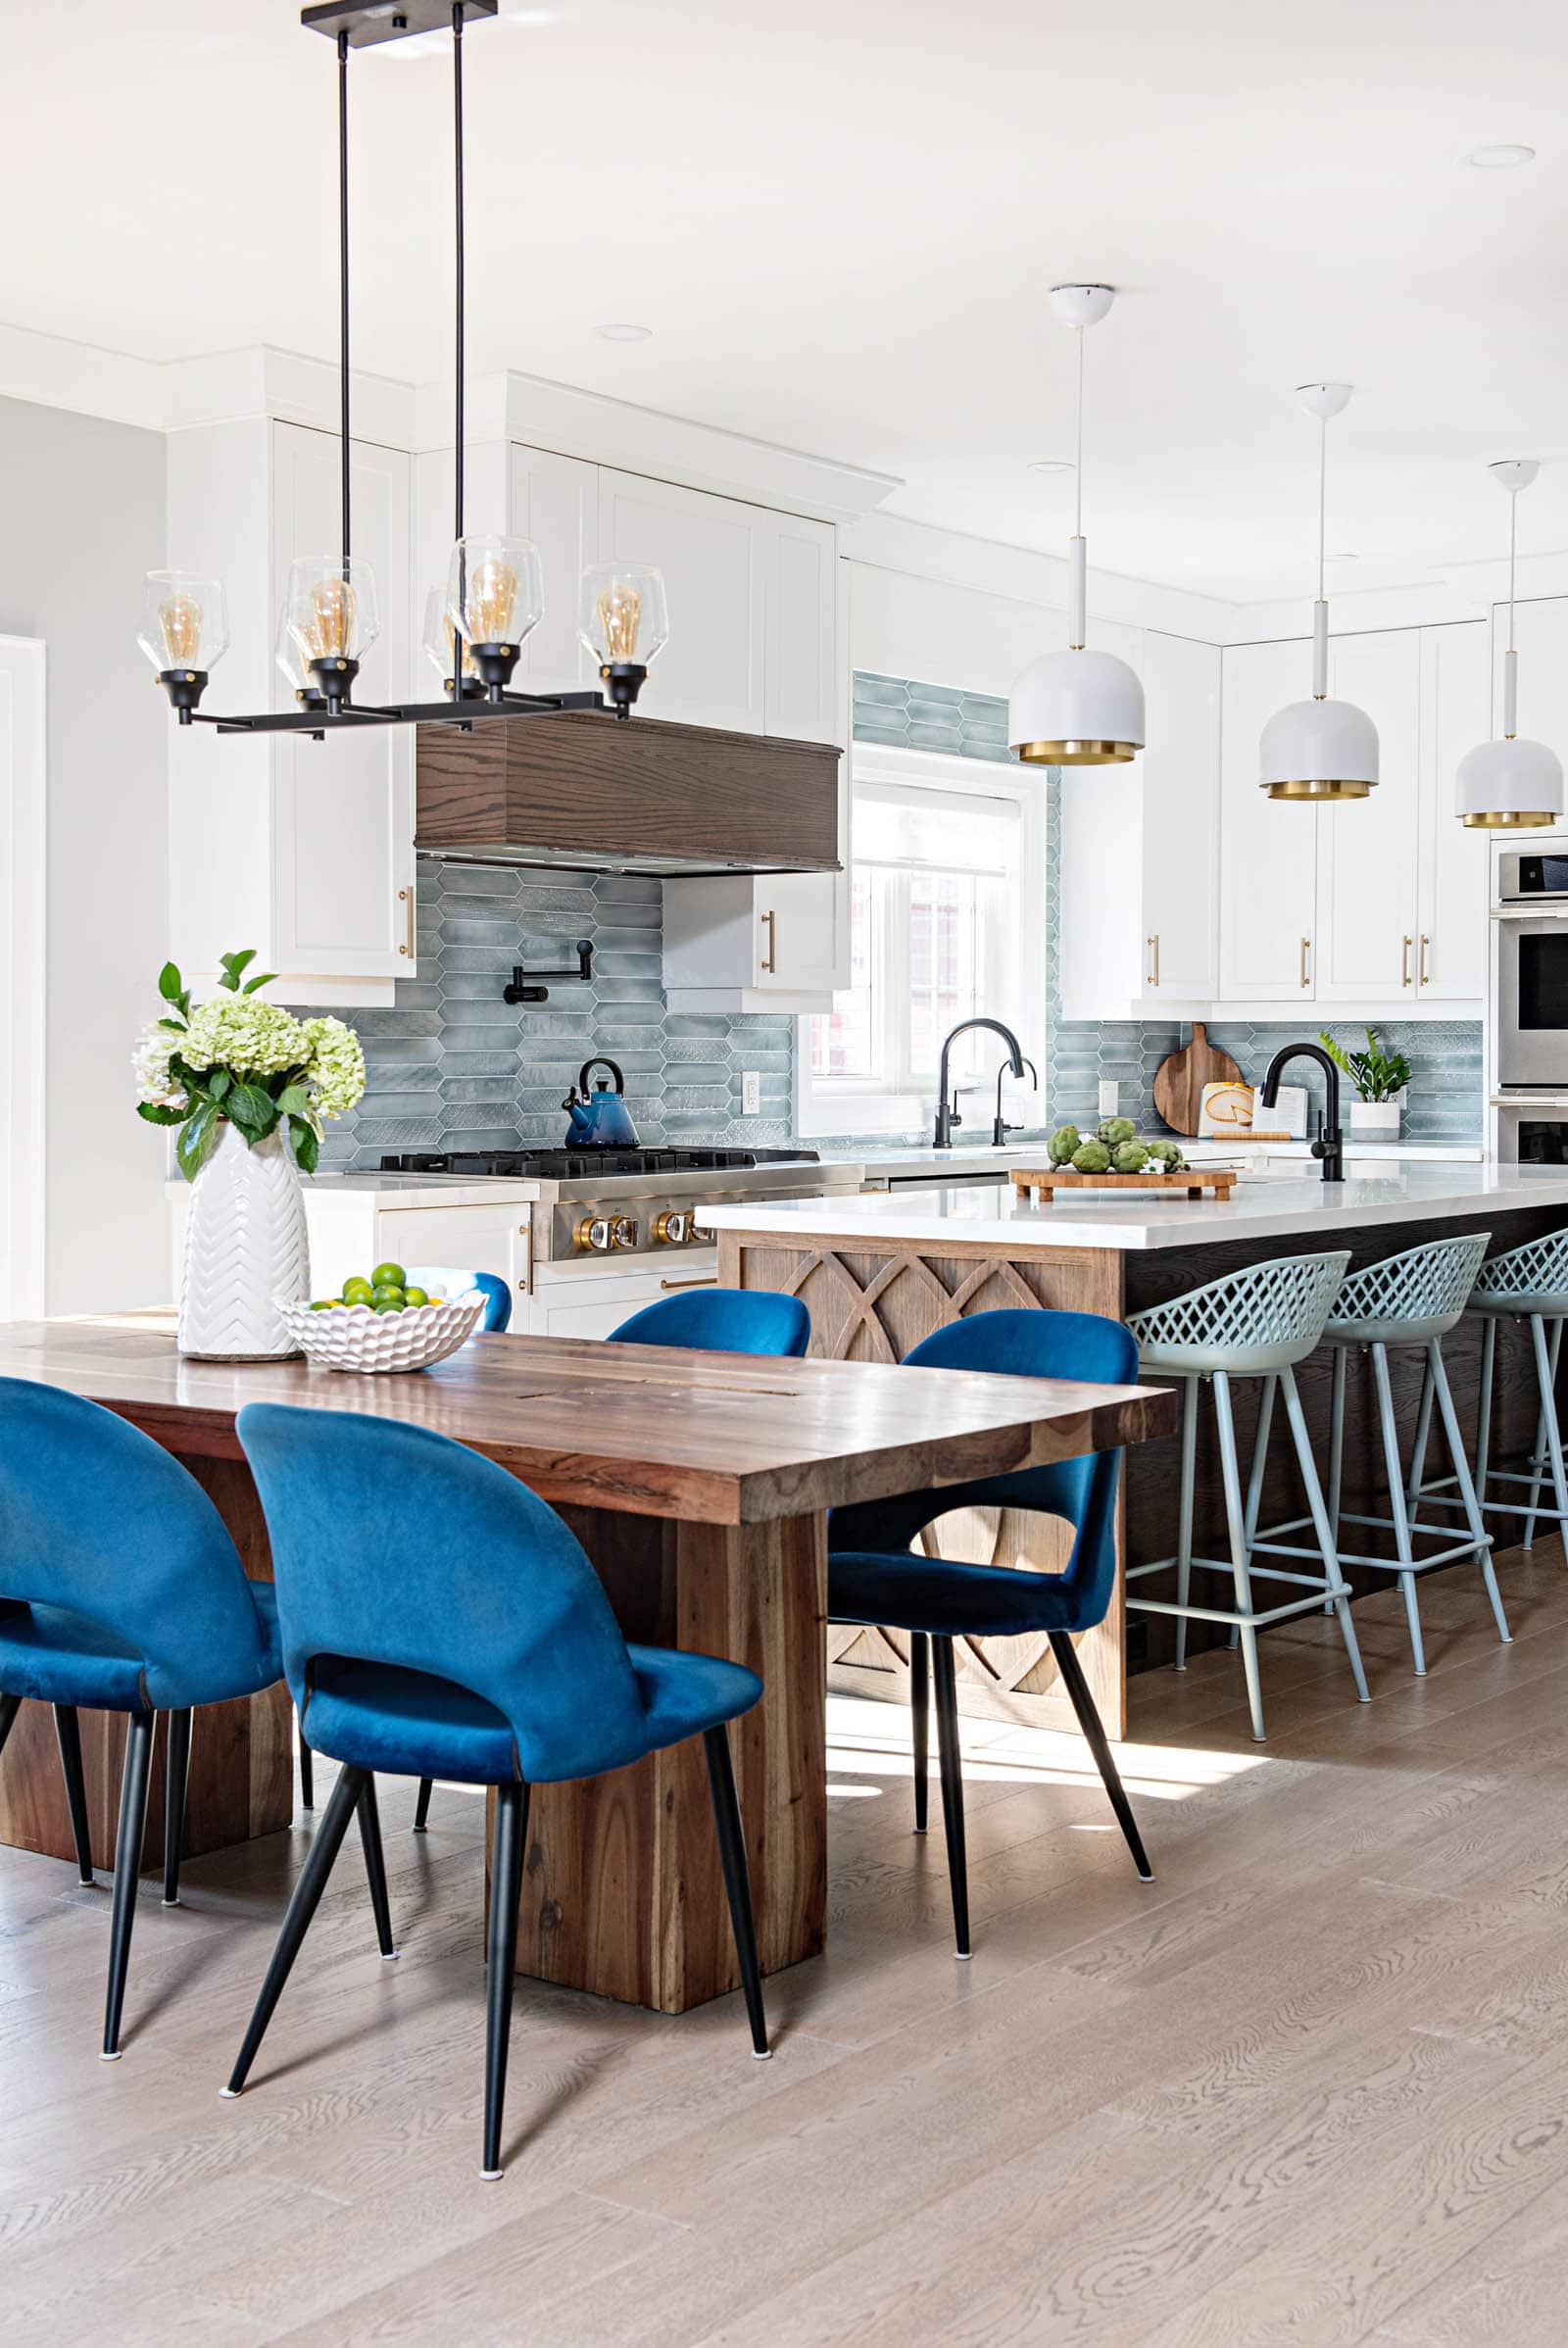 White modern farmhouse kitchen with wood island and blue accents like chairs and tile